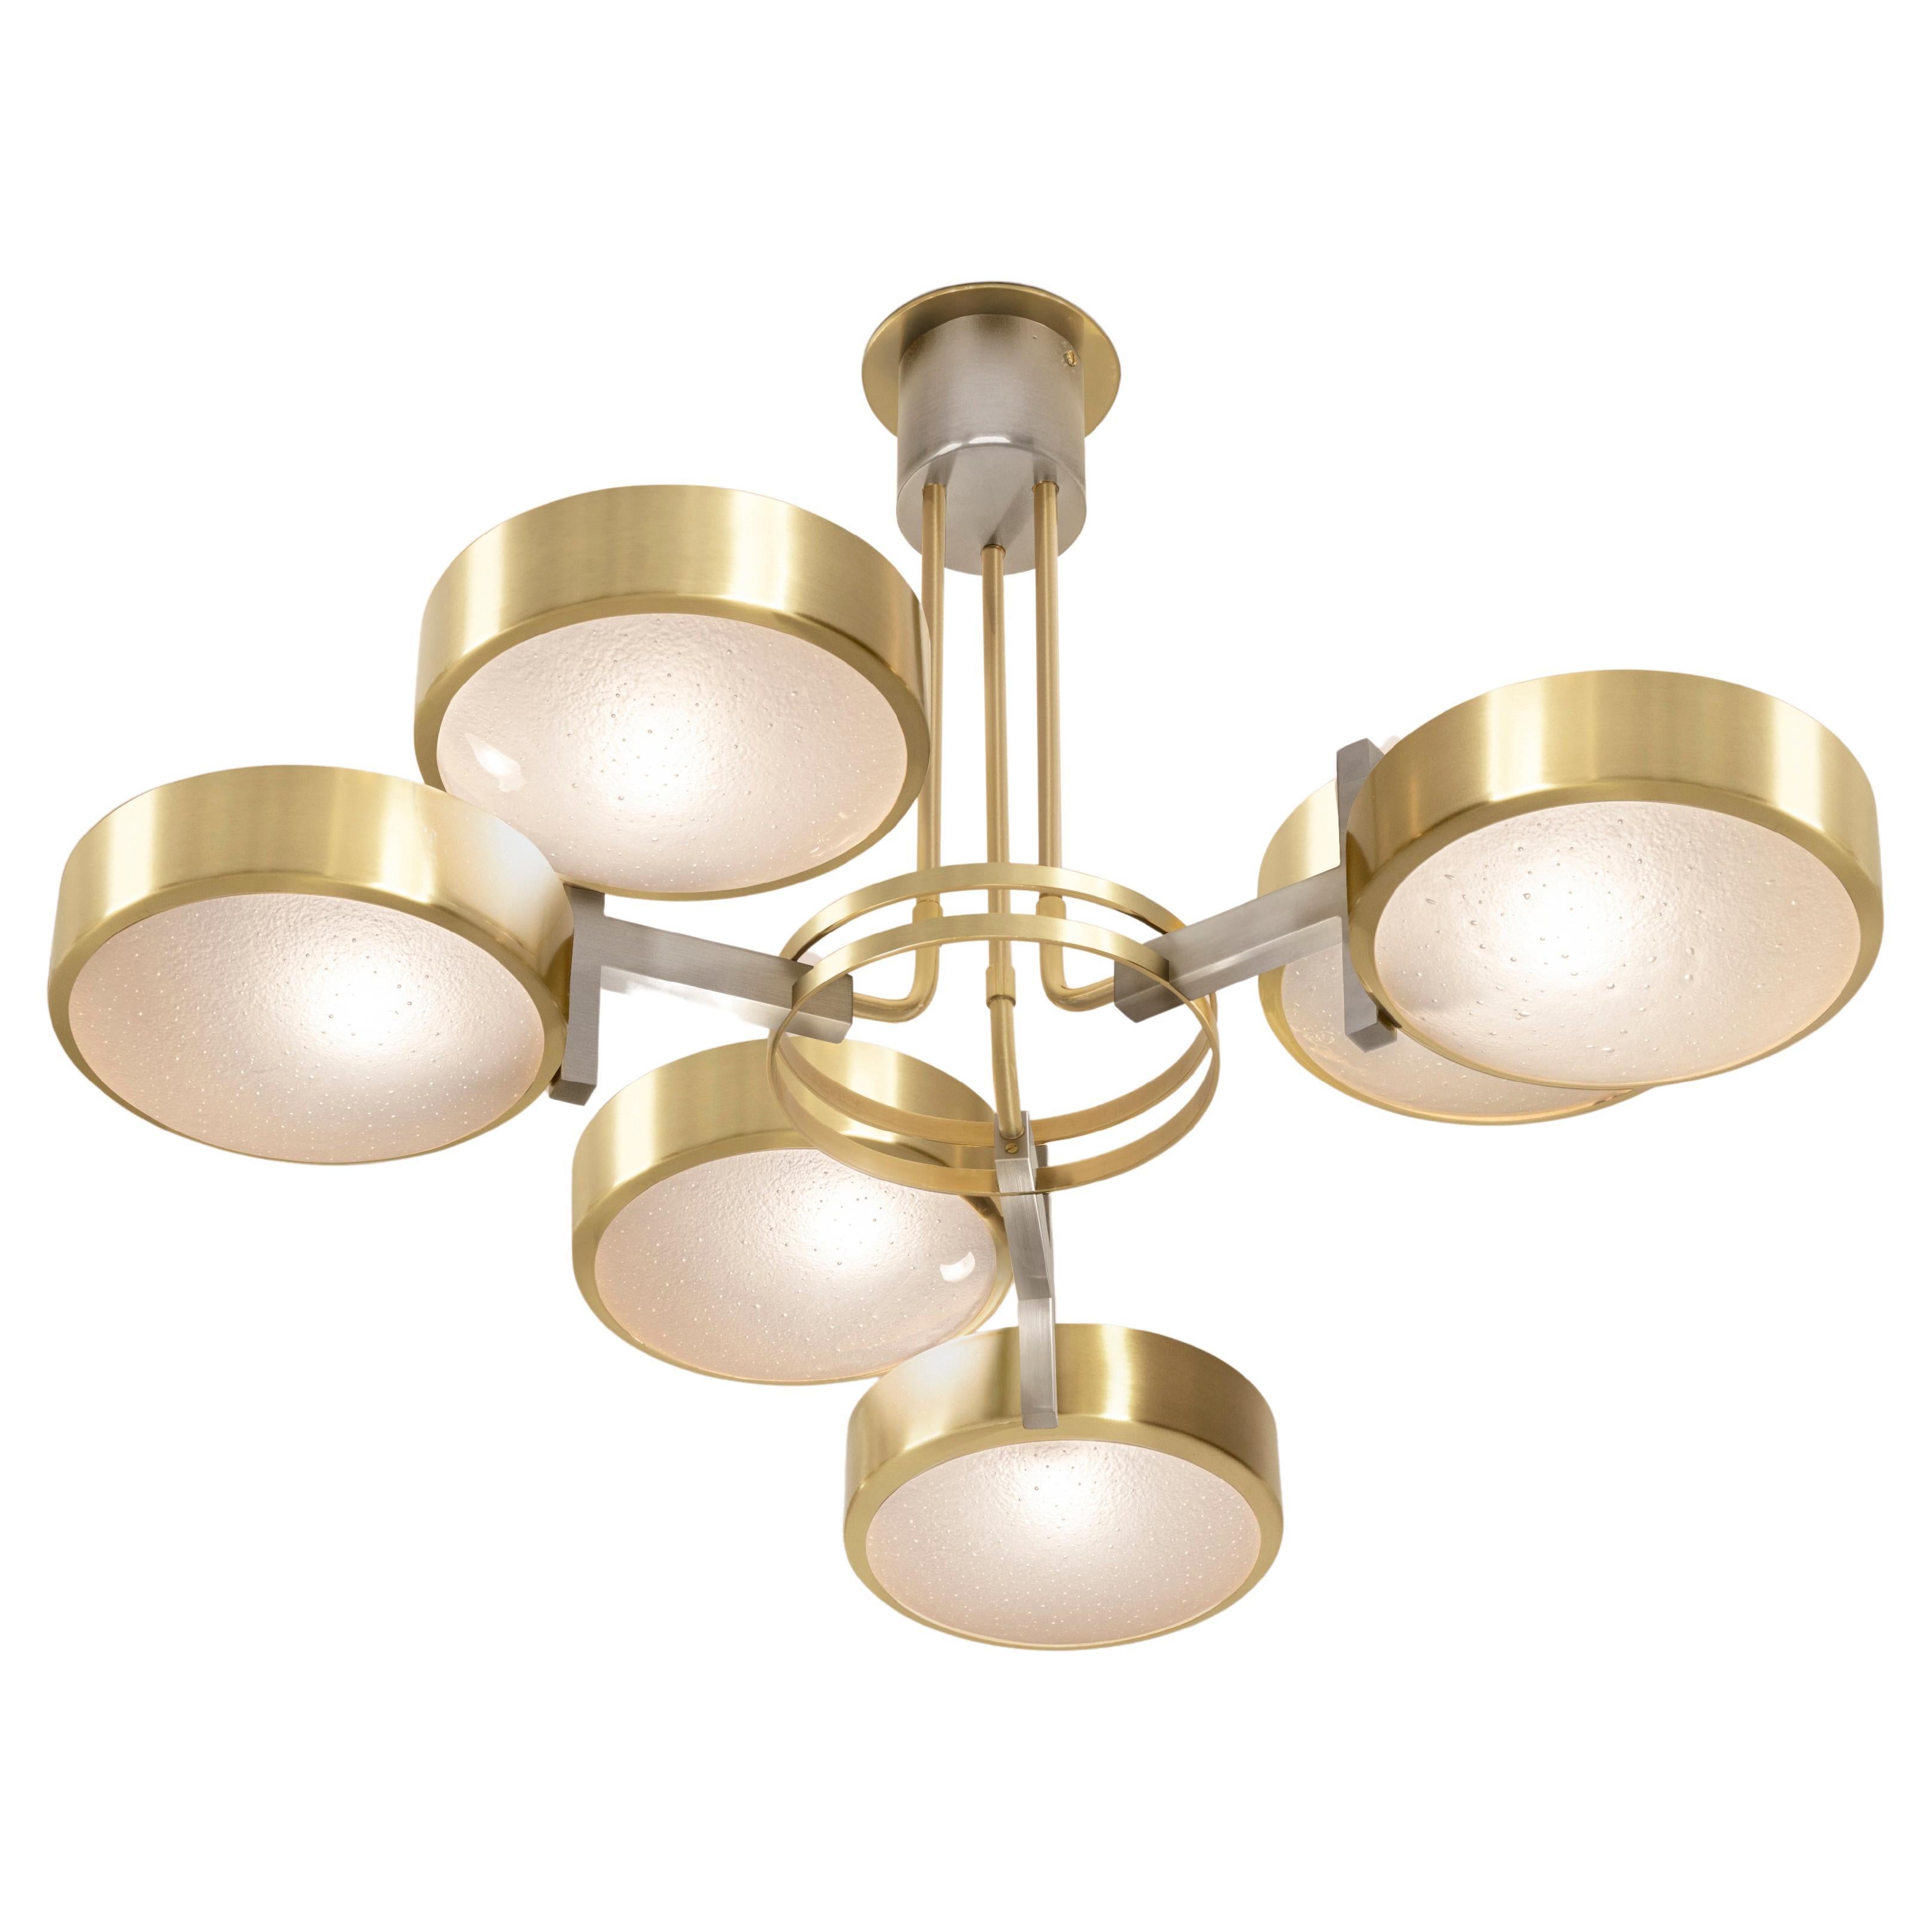 Eclissi Ceiling Light by Gaspare Asaro- Satin Brass and Satin Nickel Finish